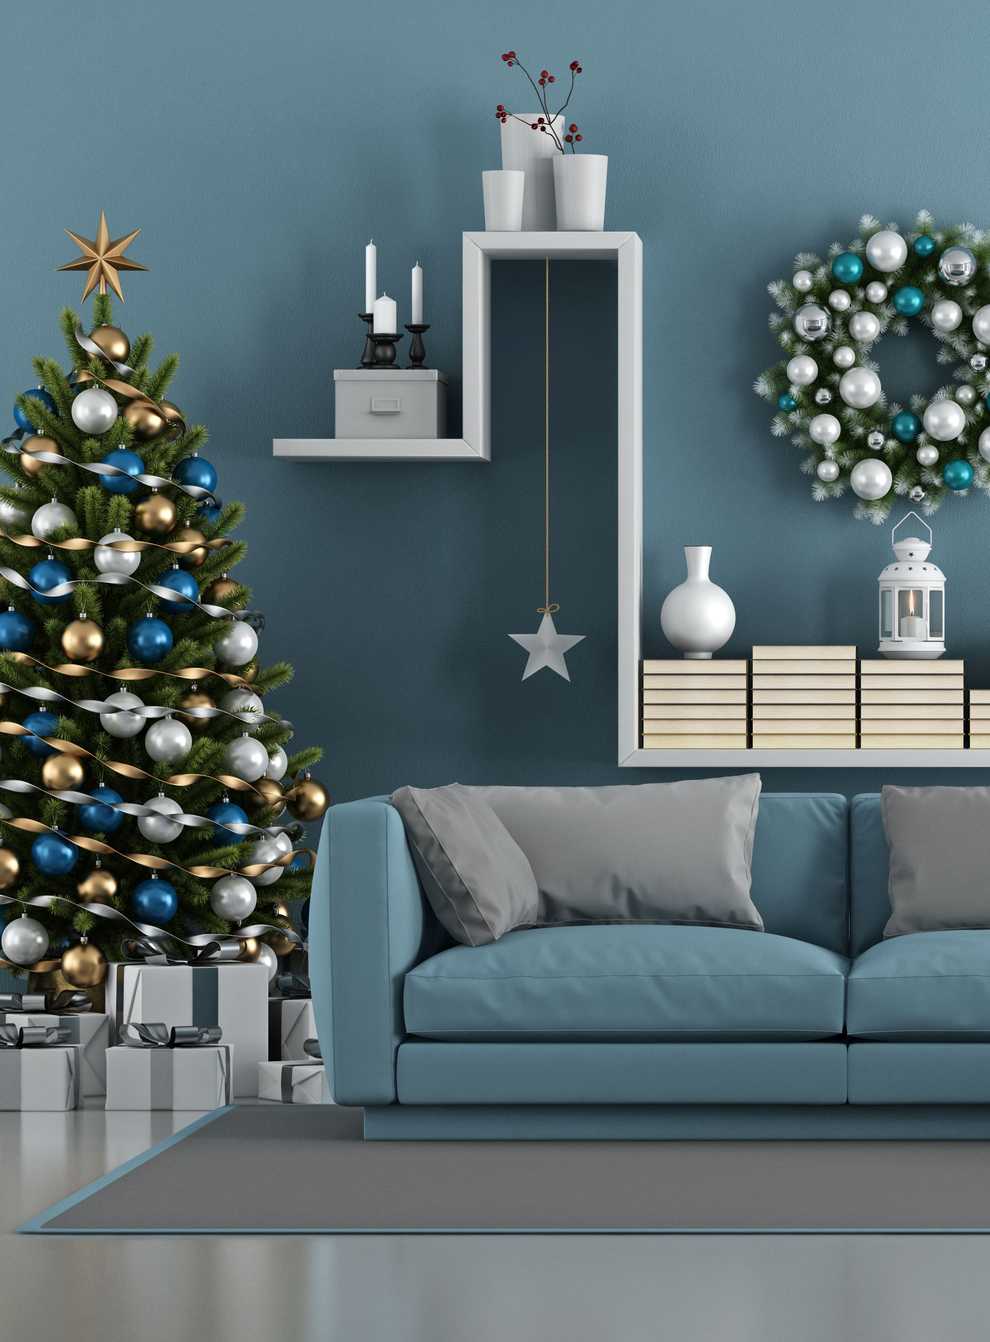 Clean and tidy living room with christmas tree, sofa and shelfing